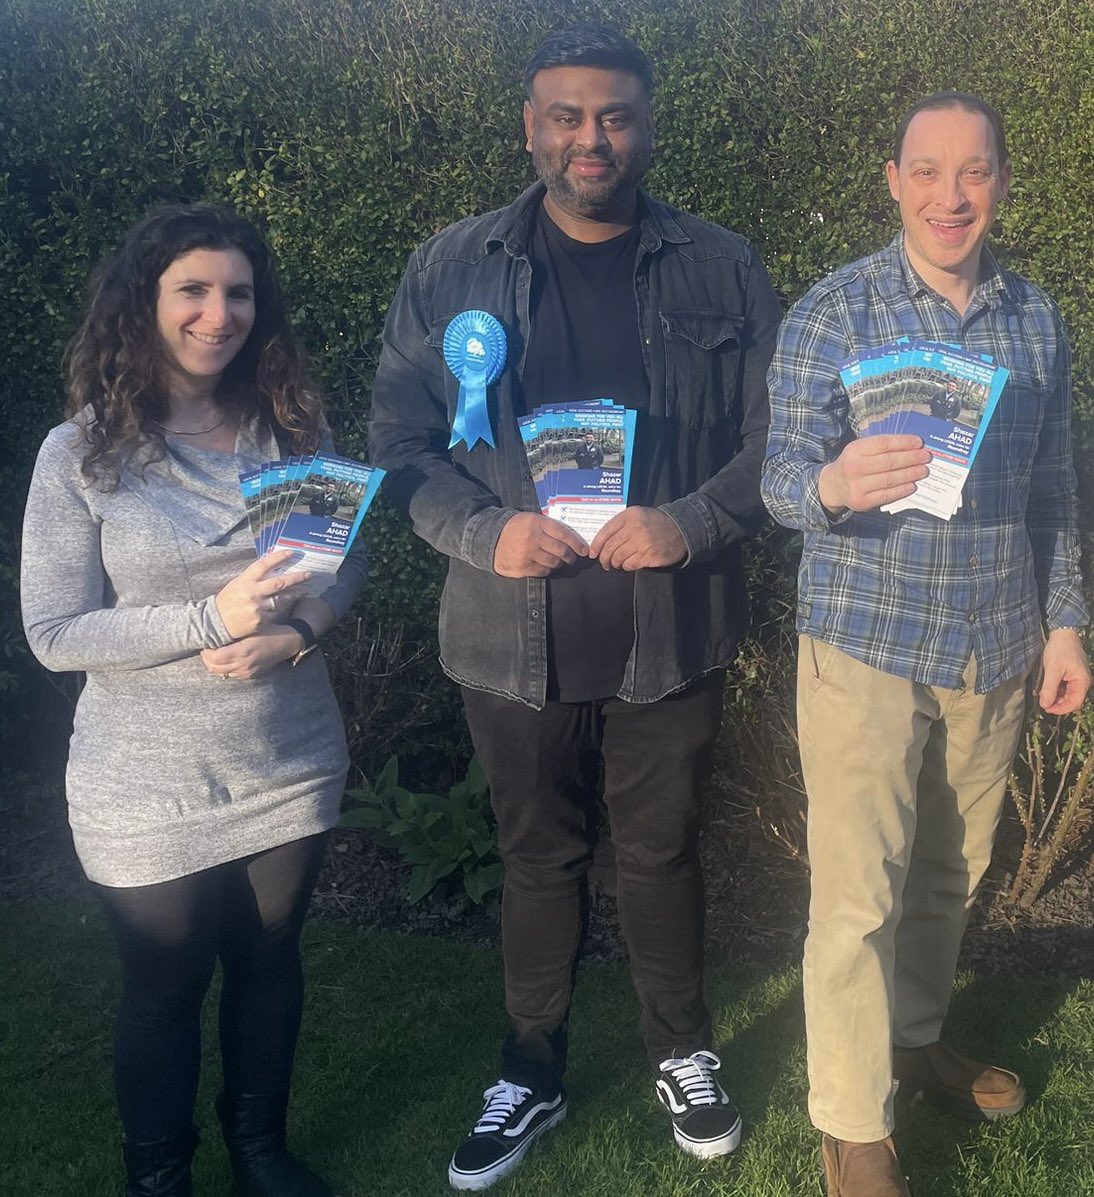 Good session this evening continuing our #Roundhay Candidate Shazar Ahad’s targeted campaign to be councillor for Roundhay in this years #Leeds local elections.